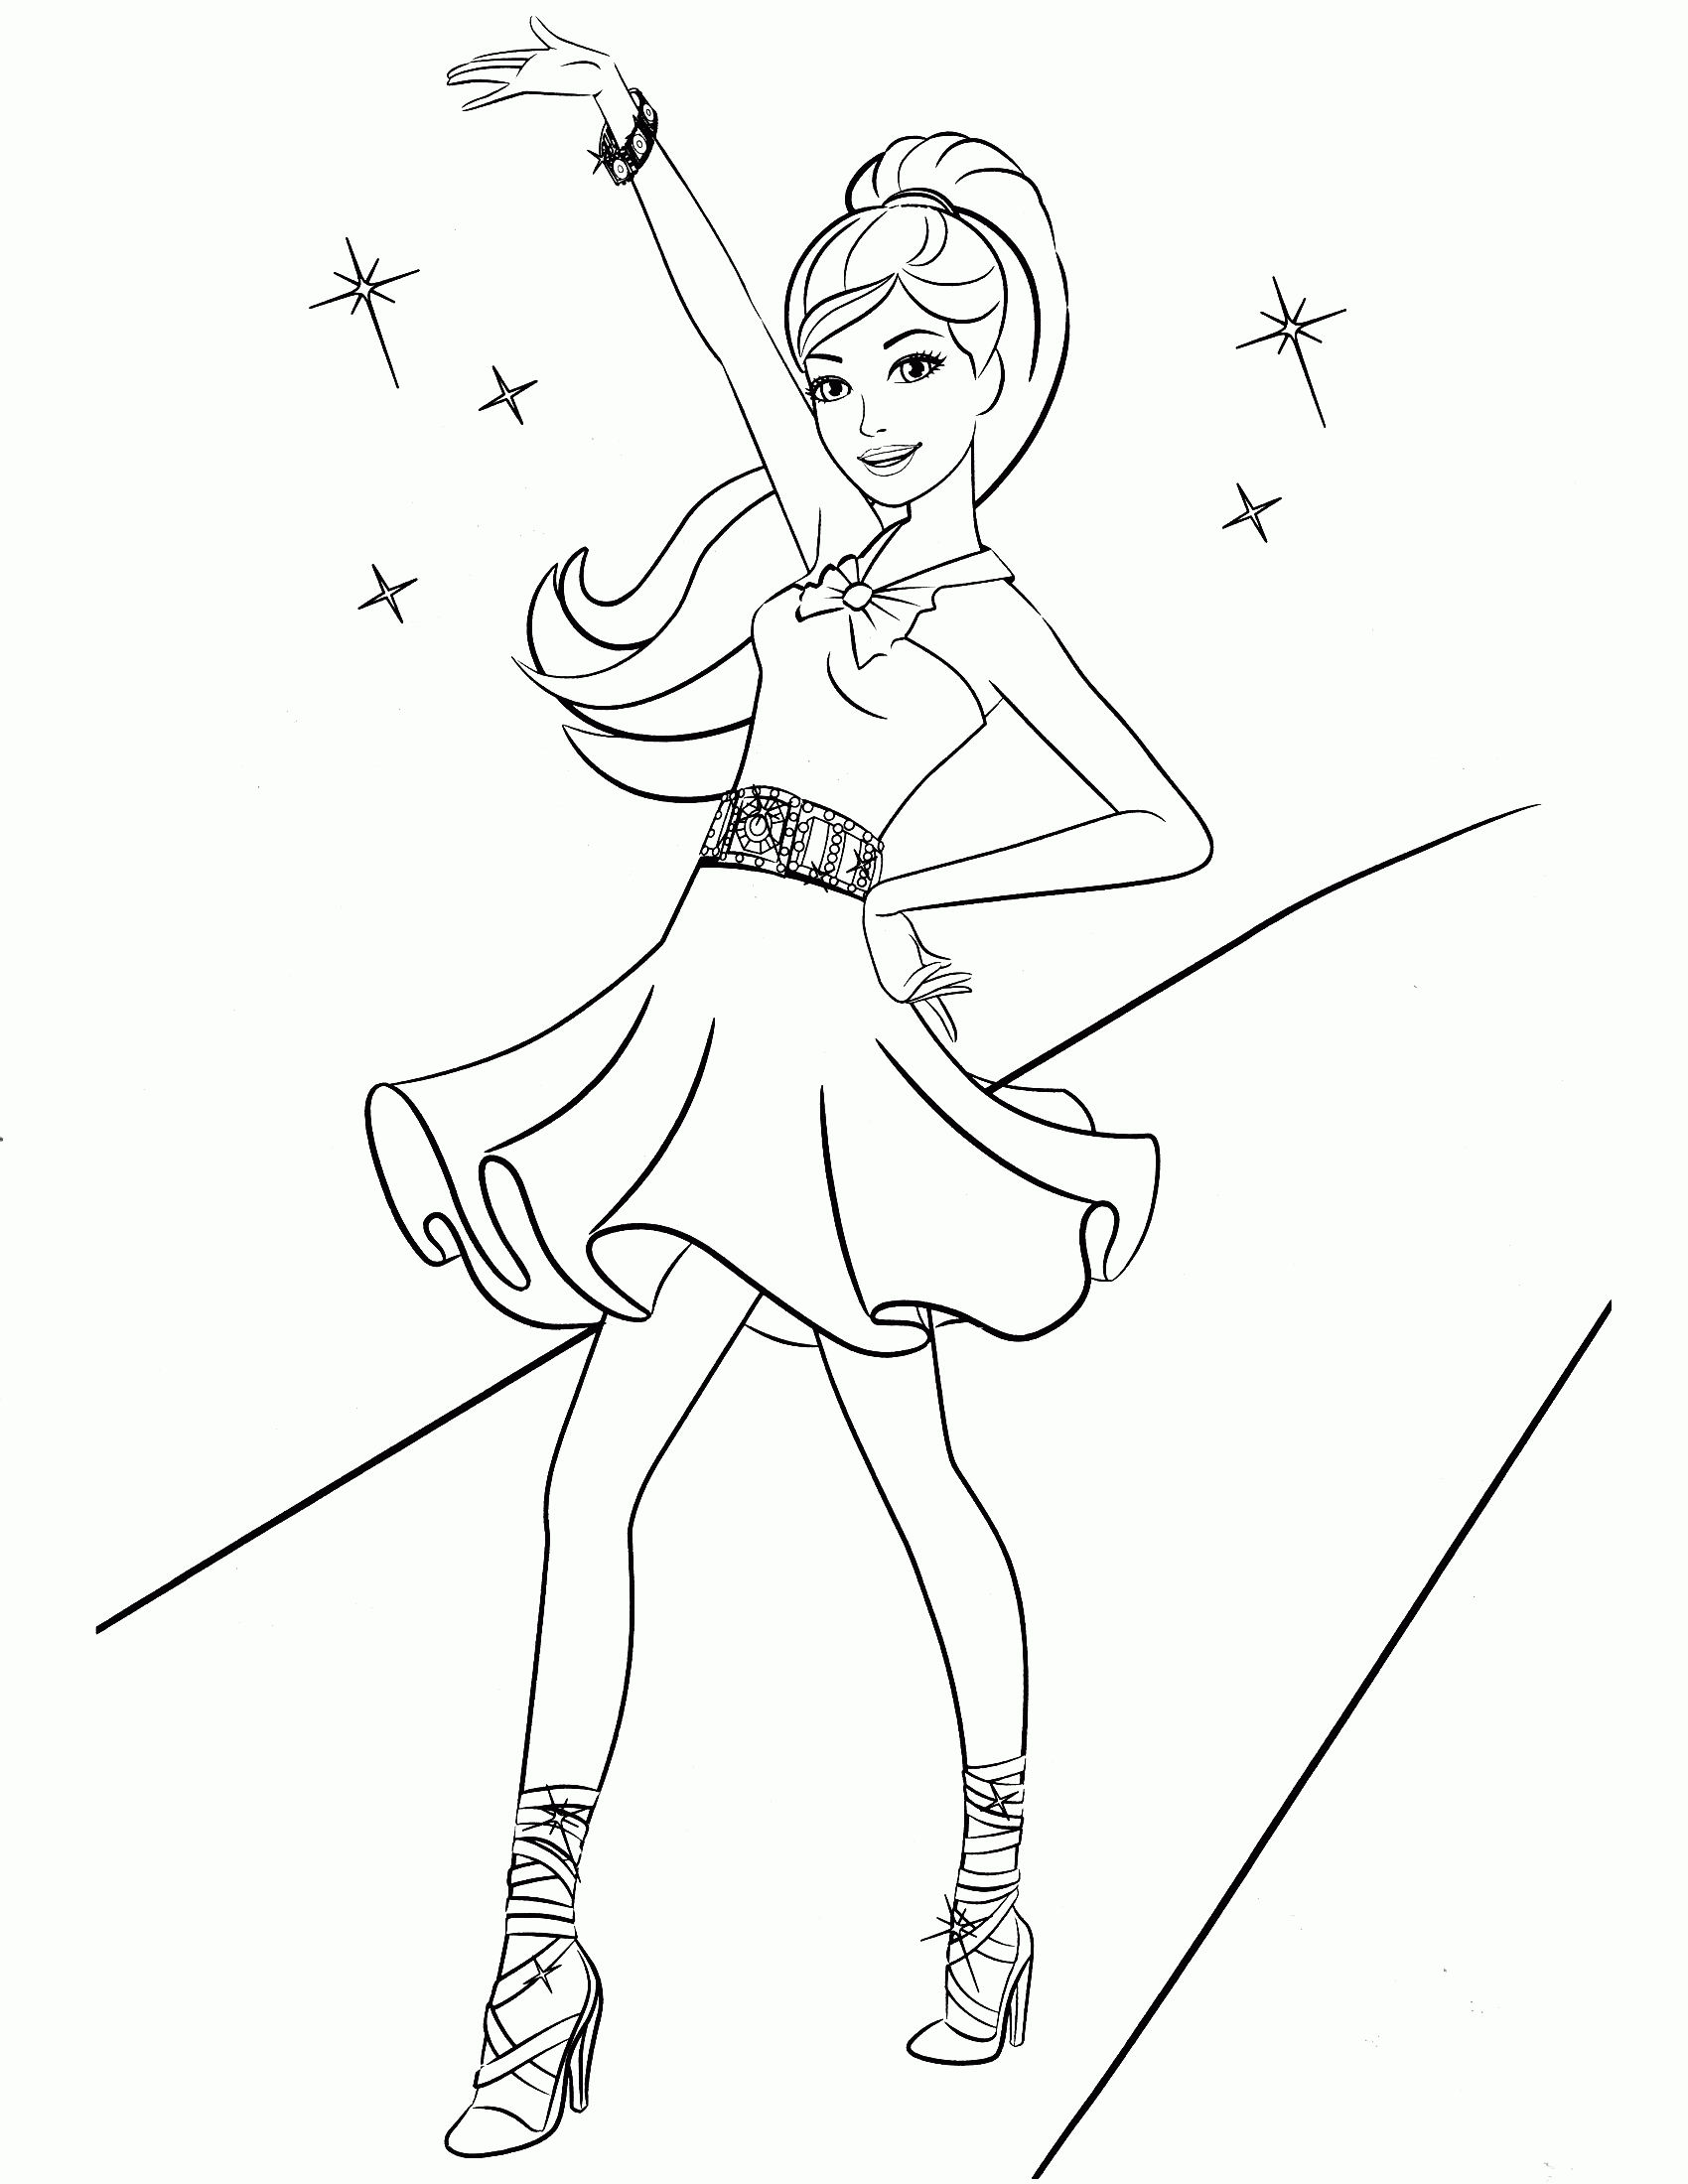 Barbie Print Out Coloring Pages - Coloring Pages For All Ages